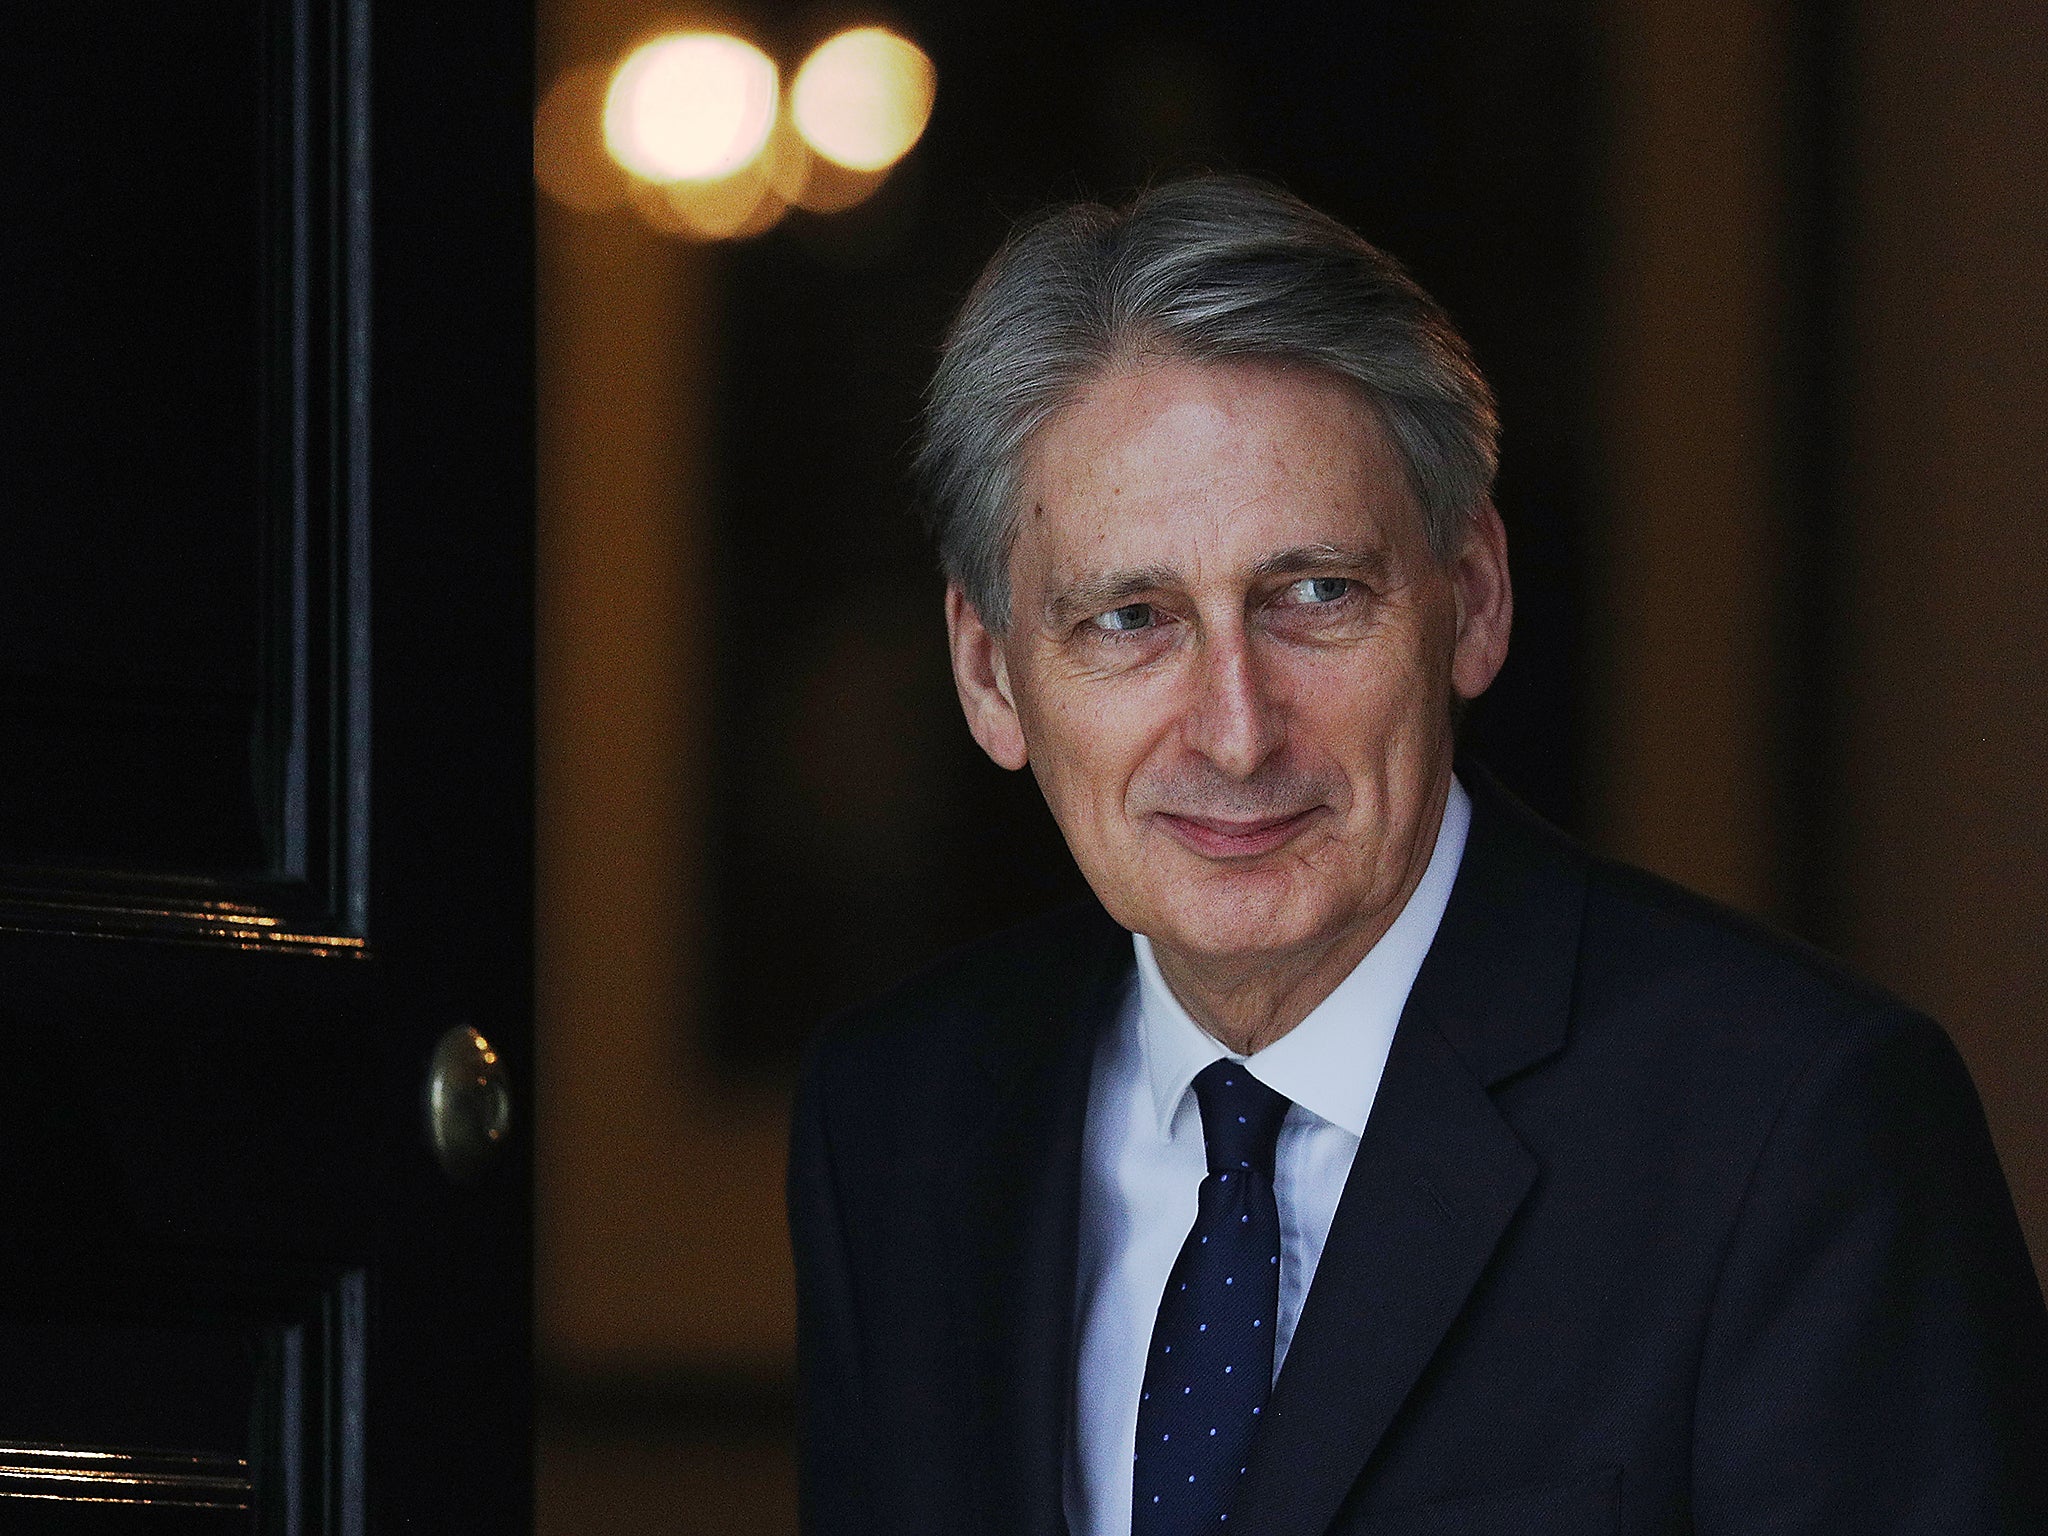 As other firms face business rates rises, Hammond's property company will pay less, it has been revealed